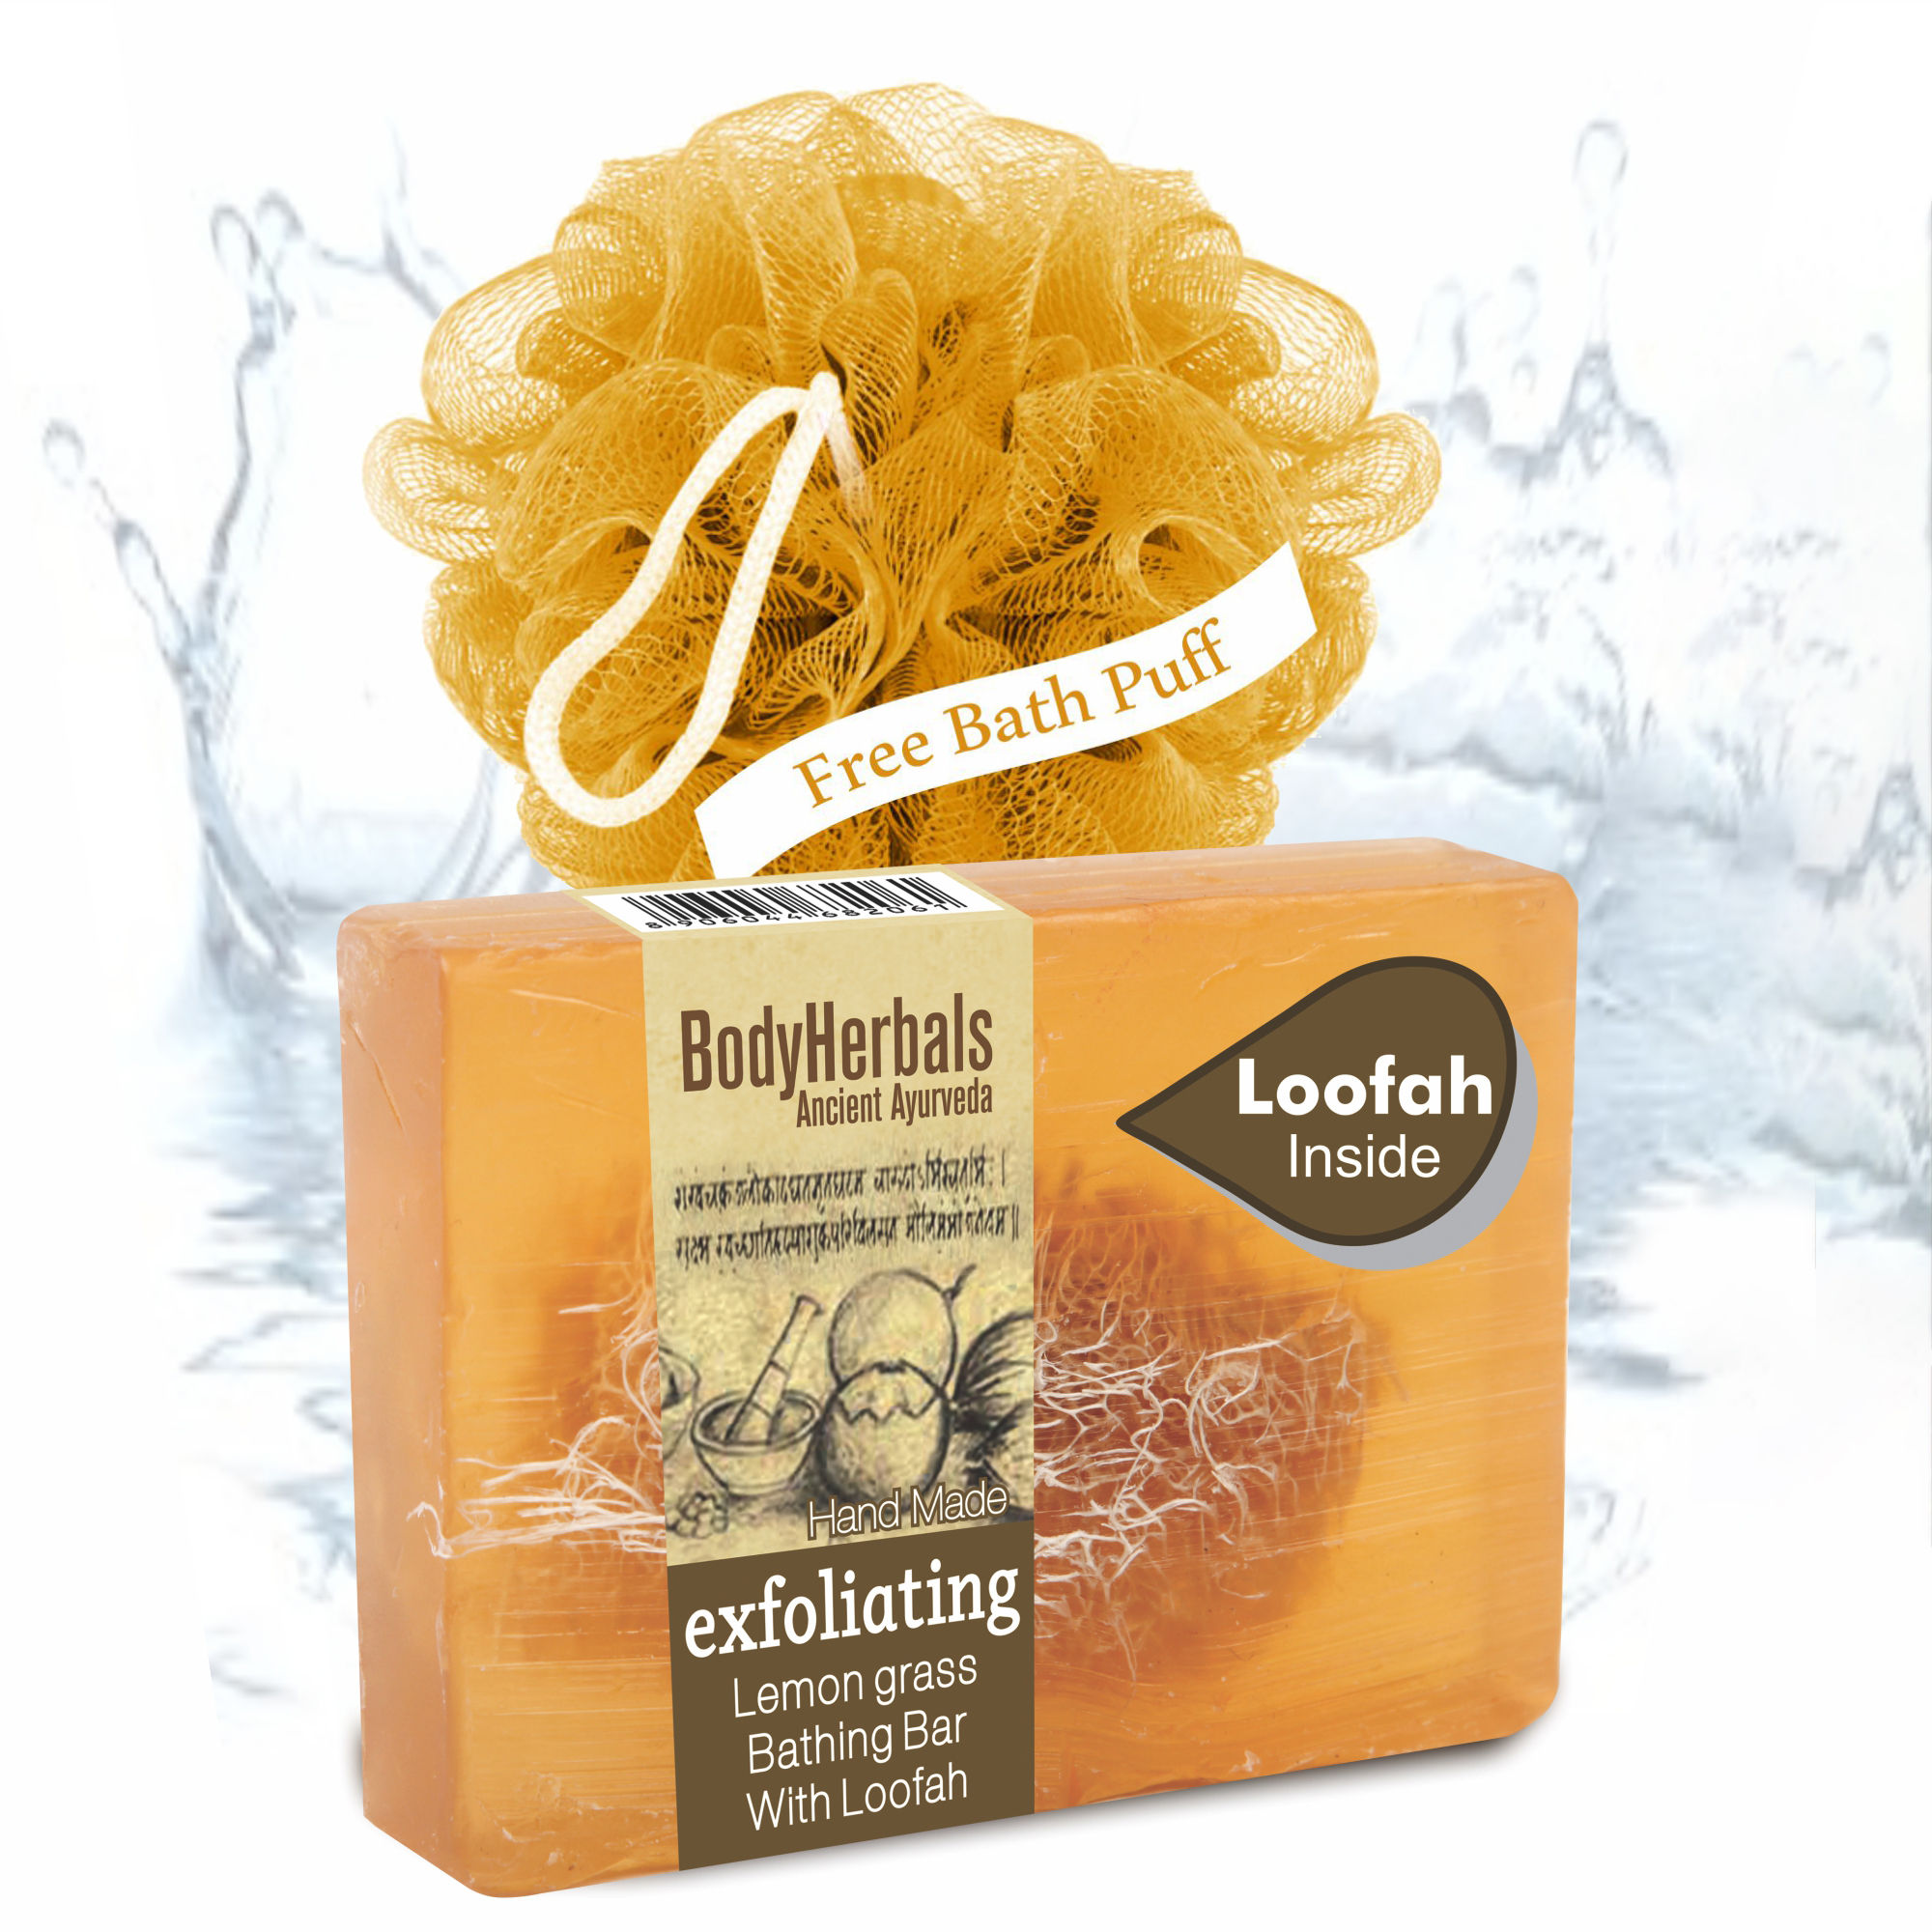 BodyHerbals Exfoliating, Hand Made Lemon Grass Bathing Bar with Loofah